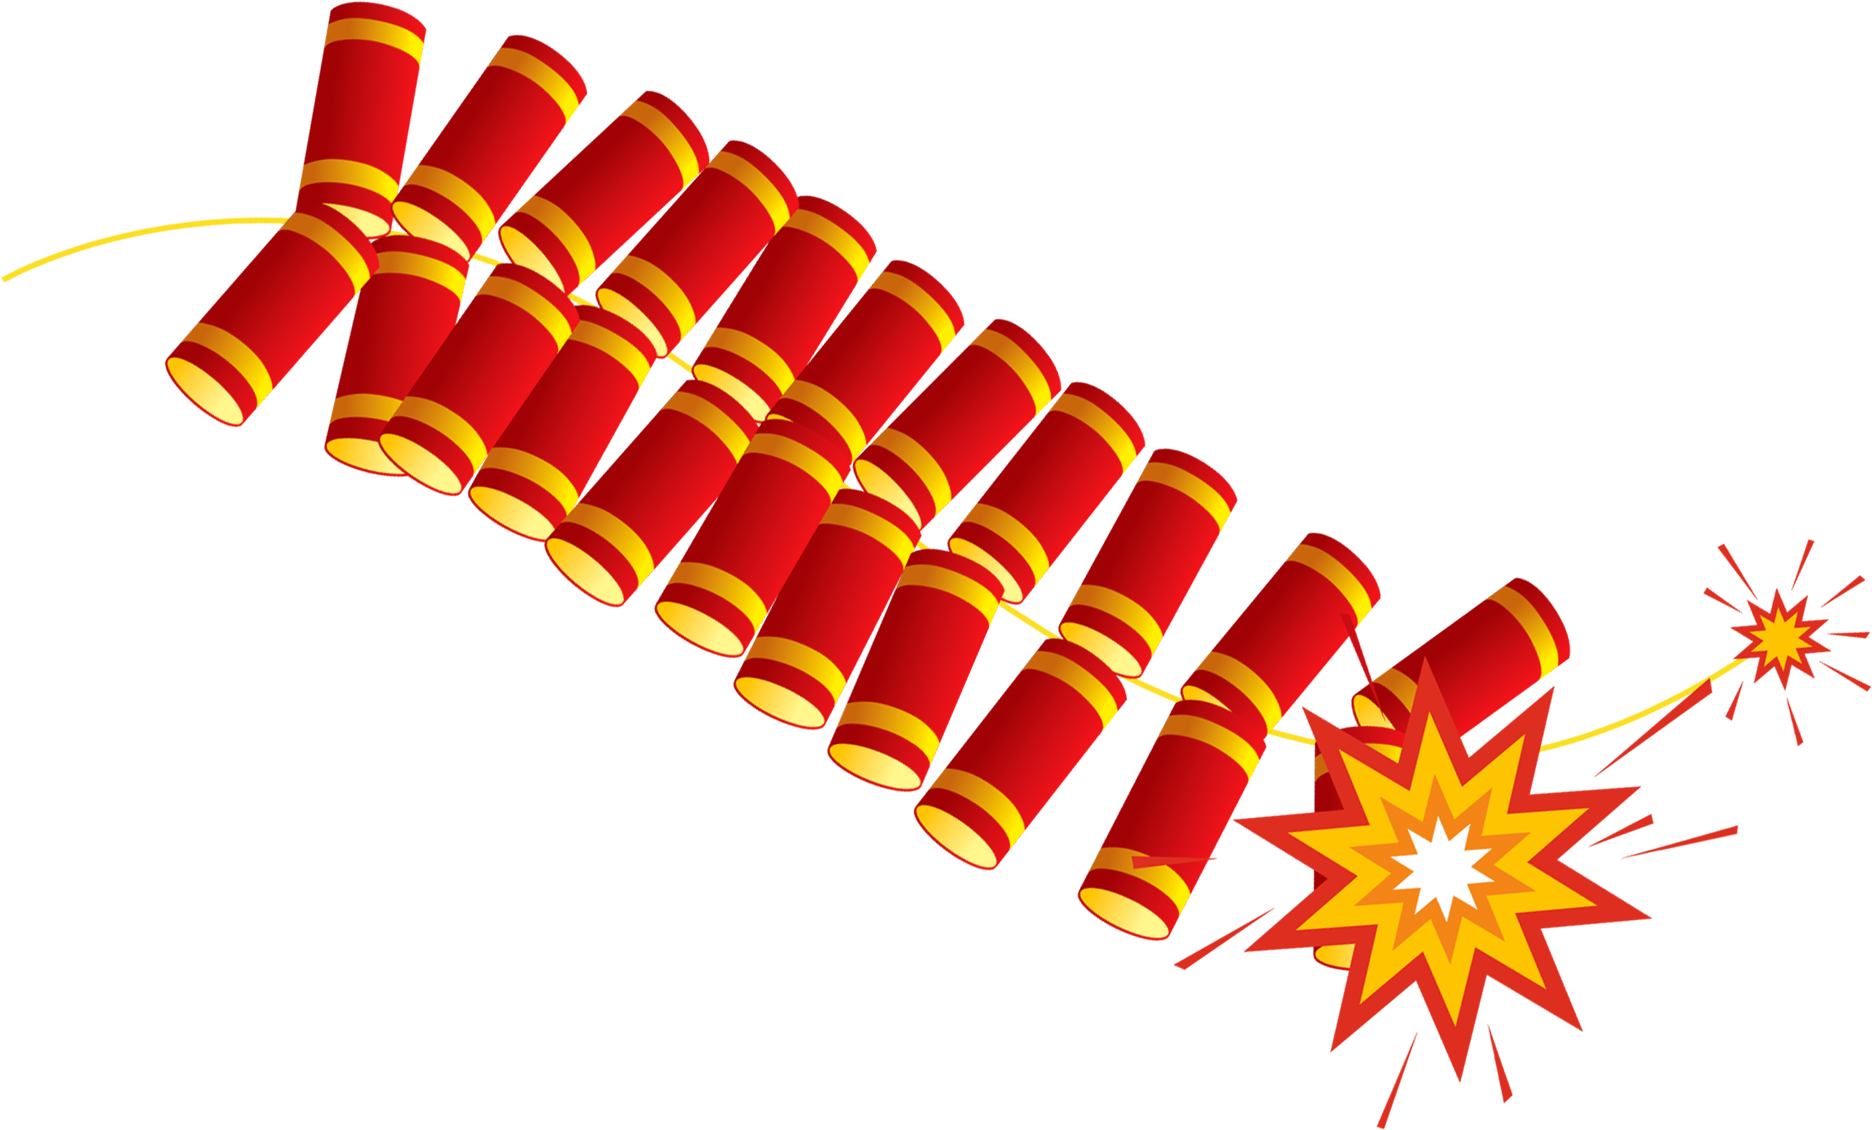 A Firecrackers On A String